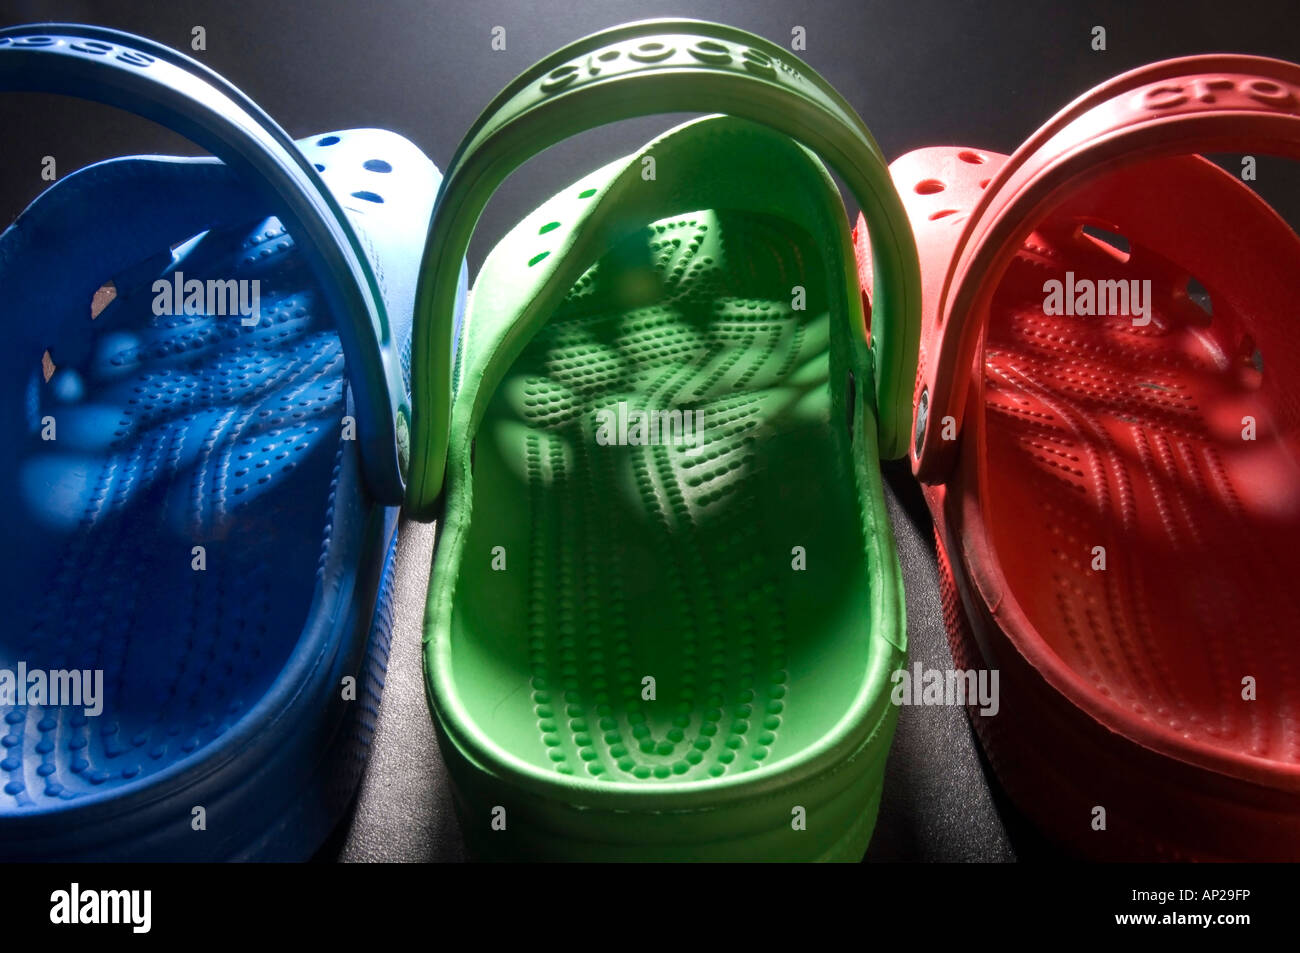 A row of  brightly coloured blue green and red Crocs clogs with light shining through the pattern of holes in the uppers Stock Photo